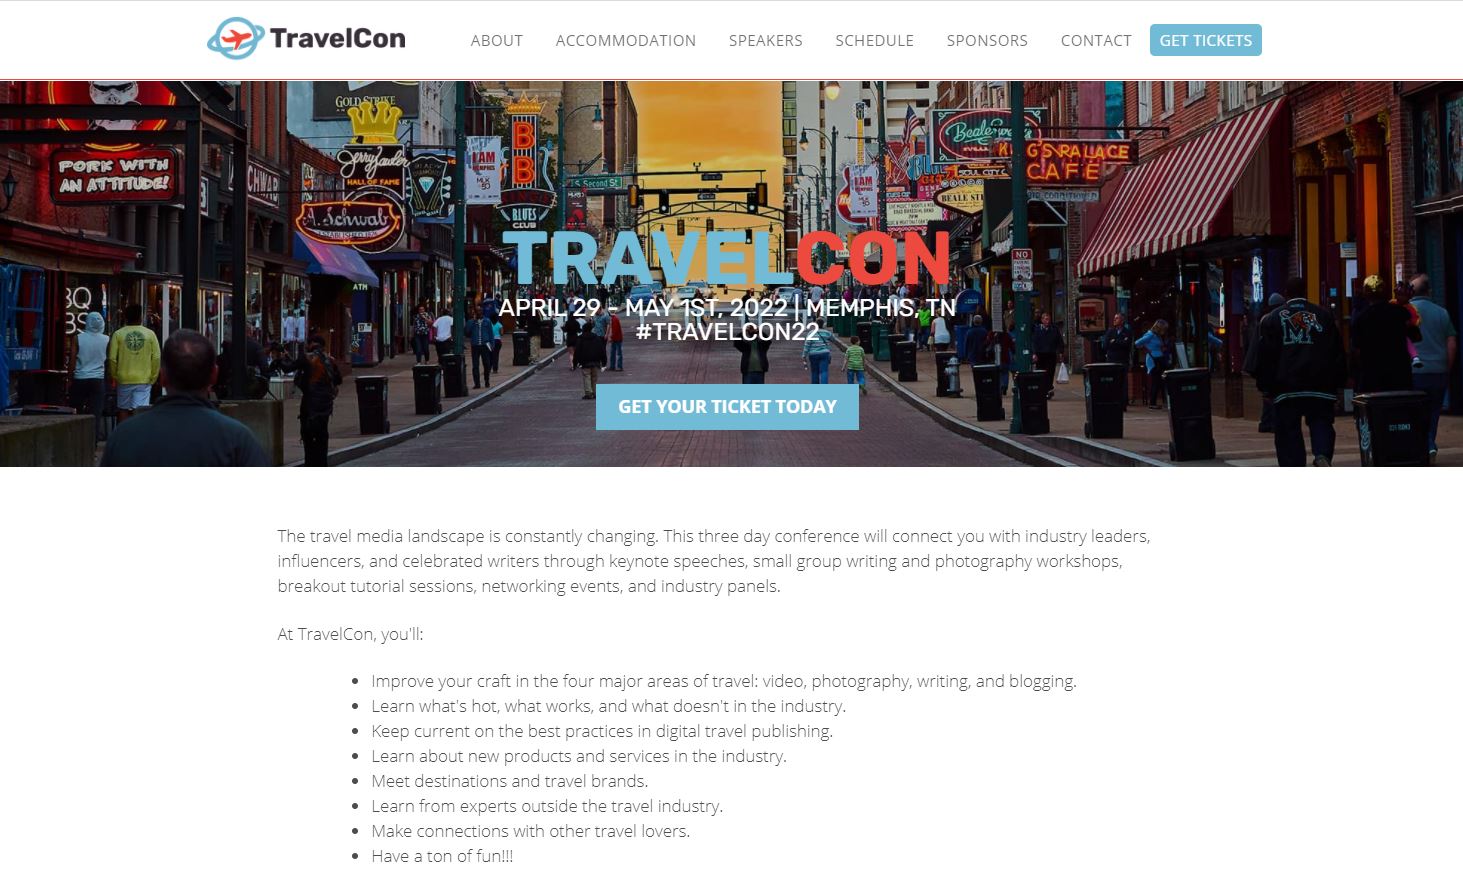 TravelCon marketing conference 2022